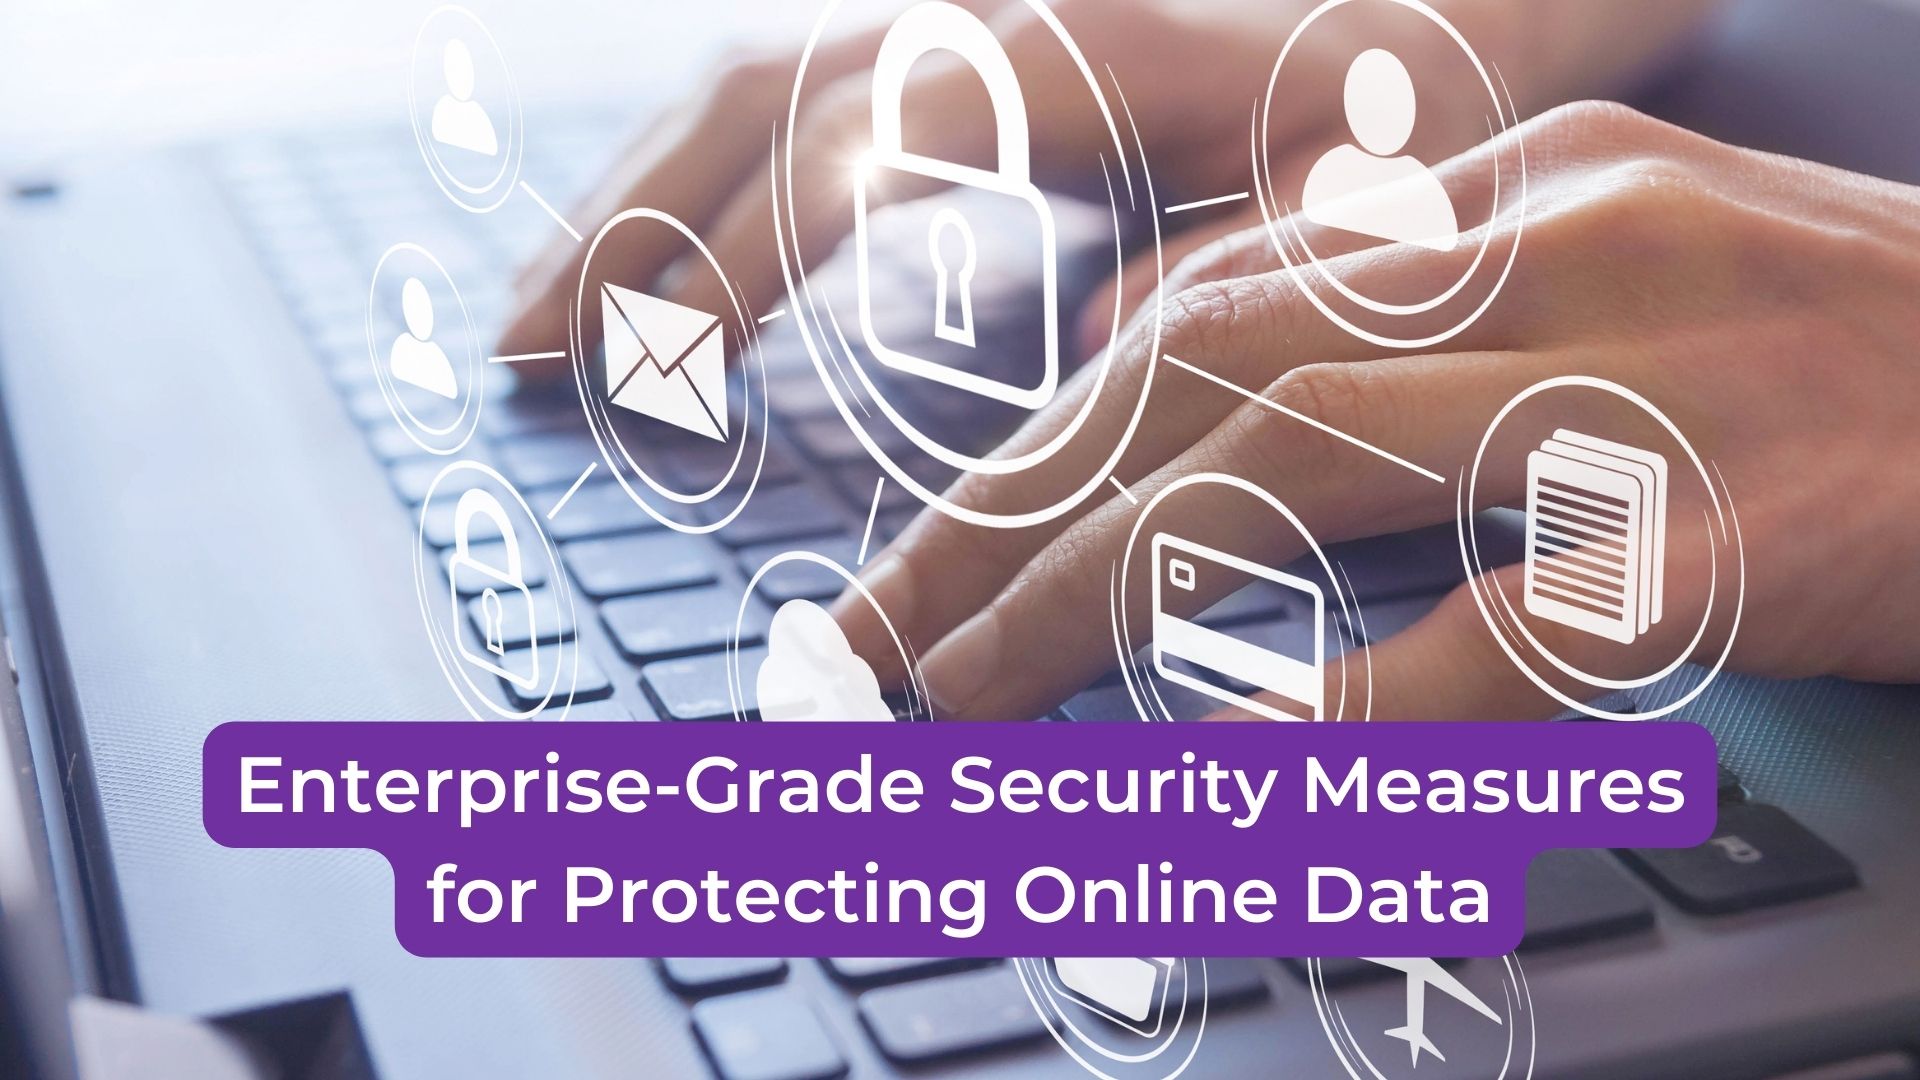 Measures for Protecting Online Data